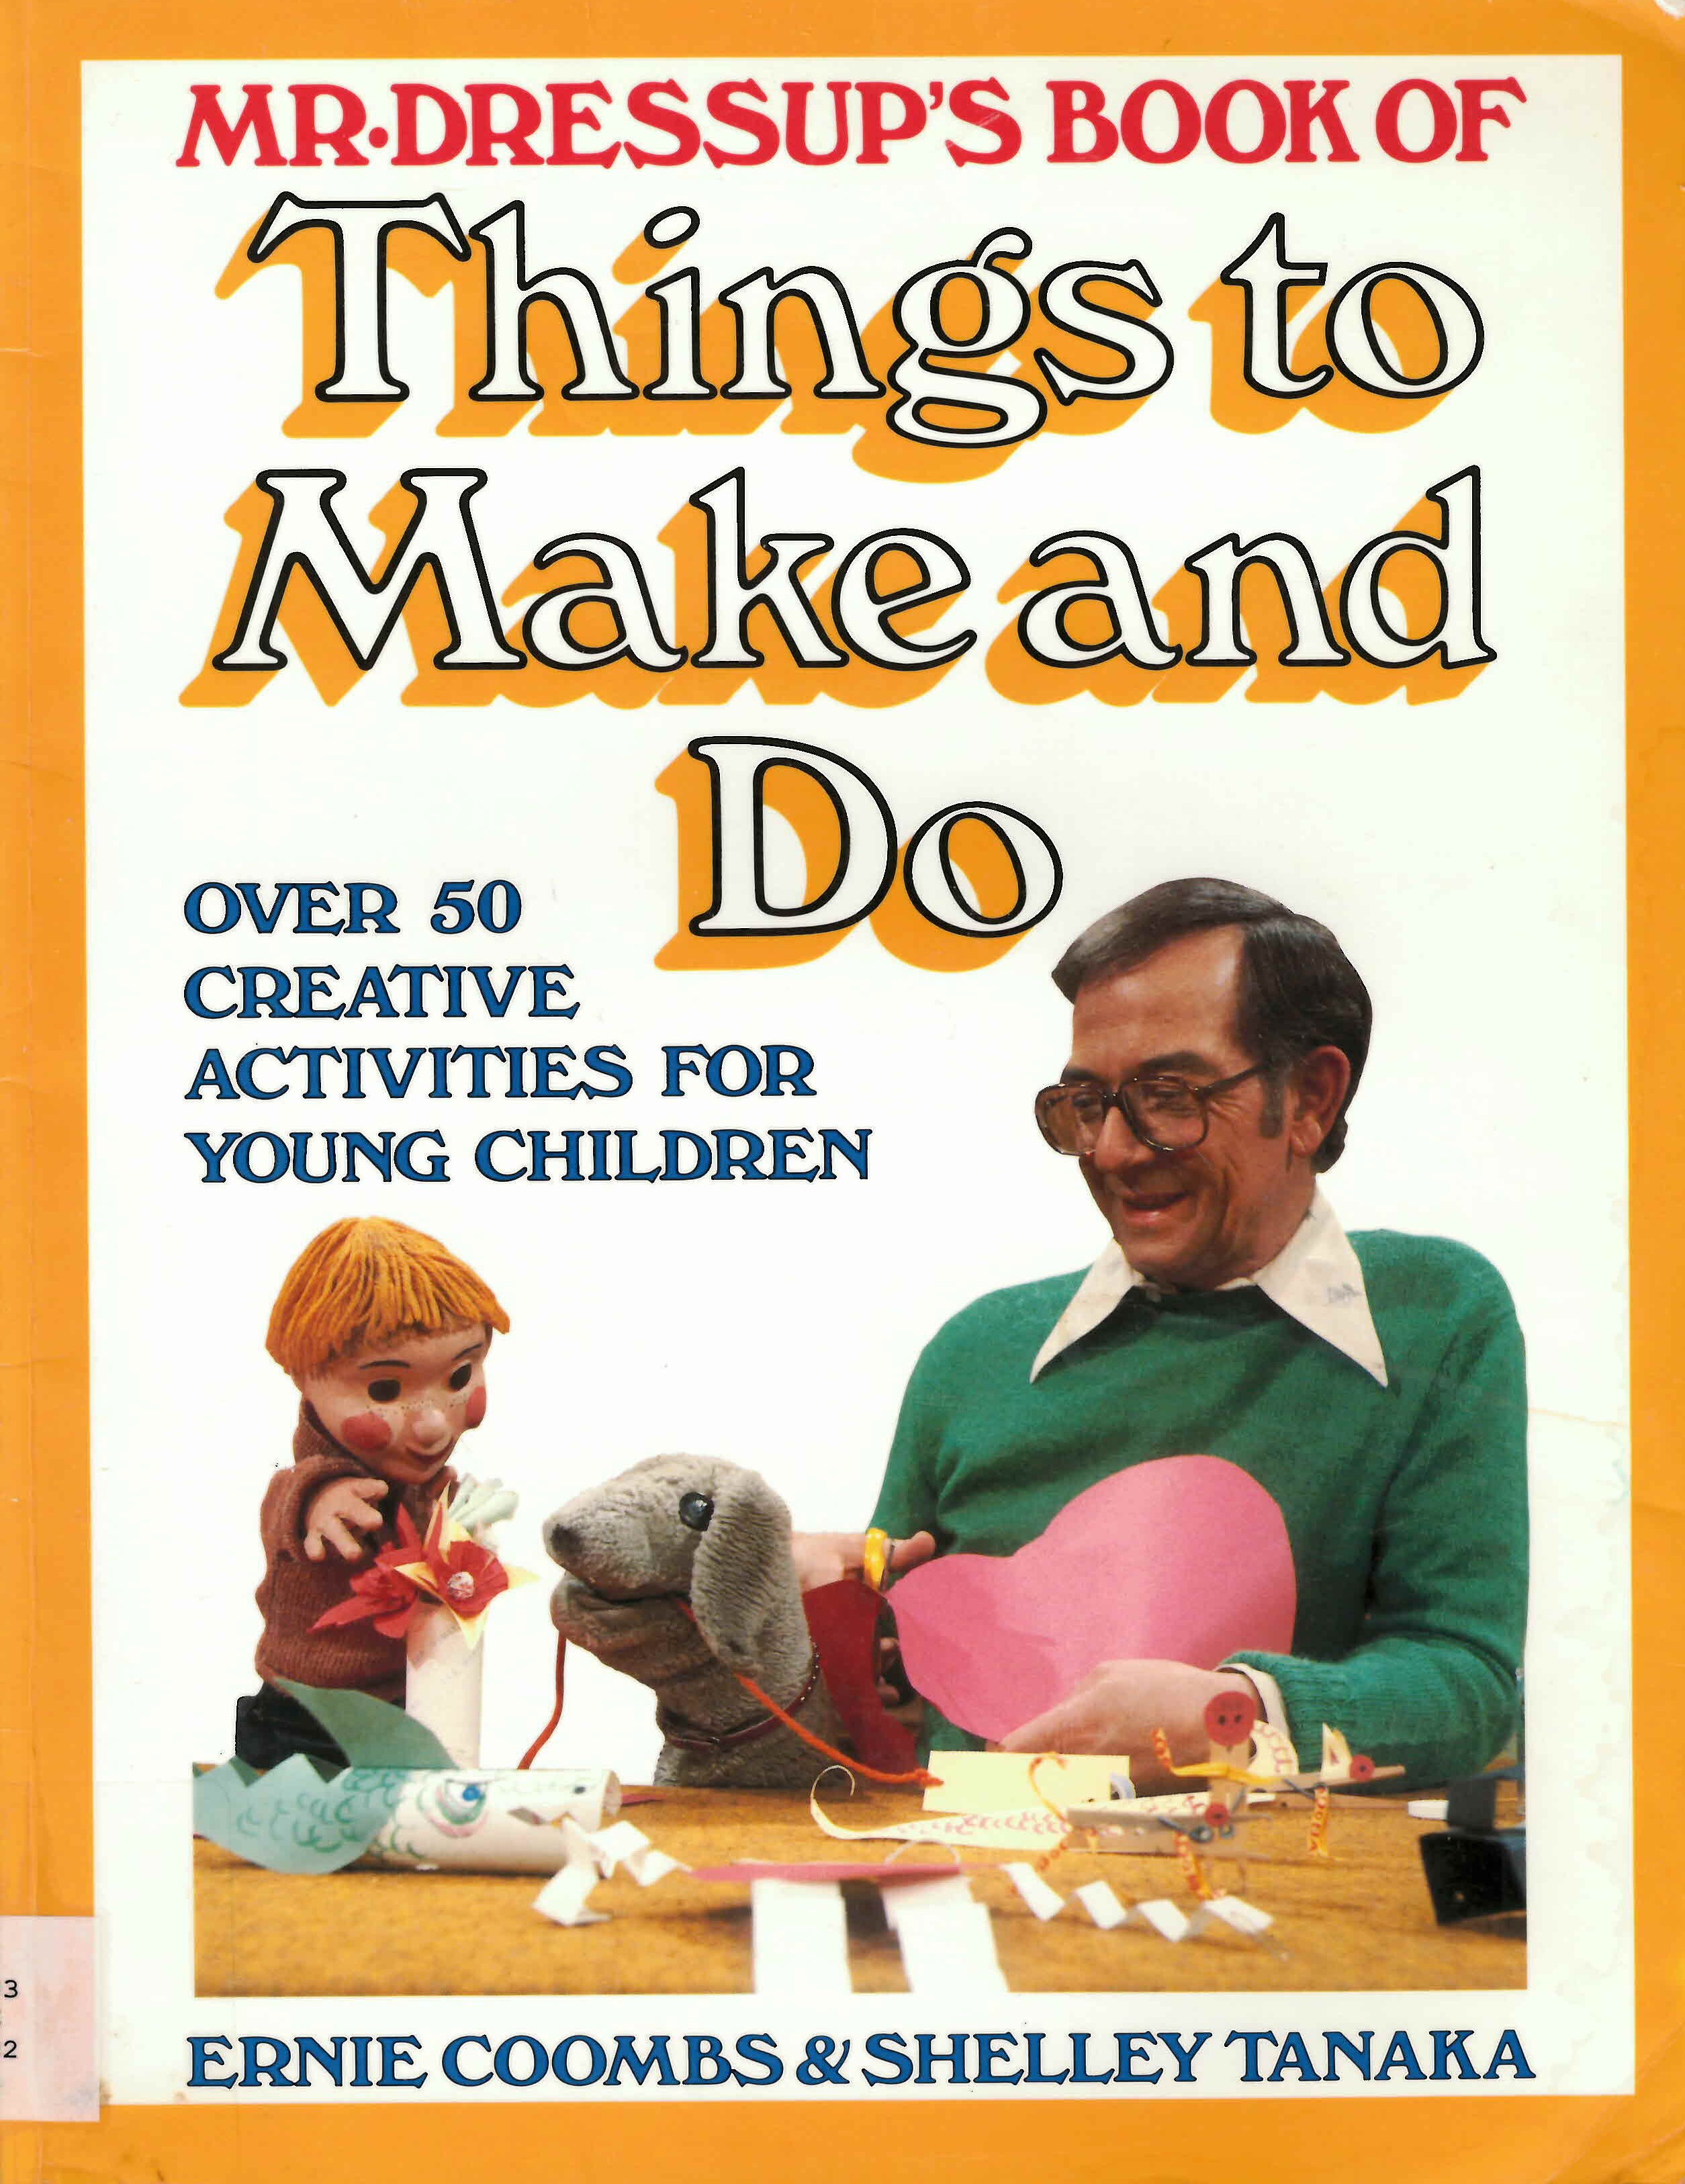 Mr. Dressup's book of things to make and do : over 50 creative activities for young children